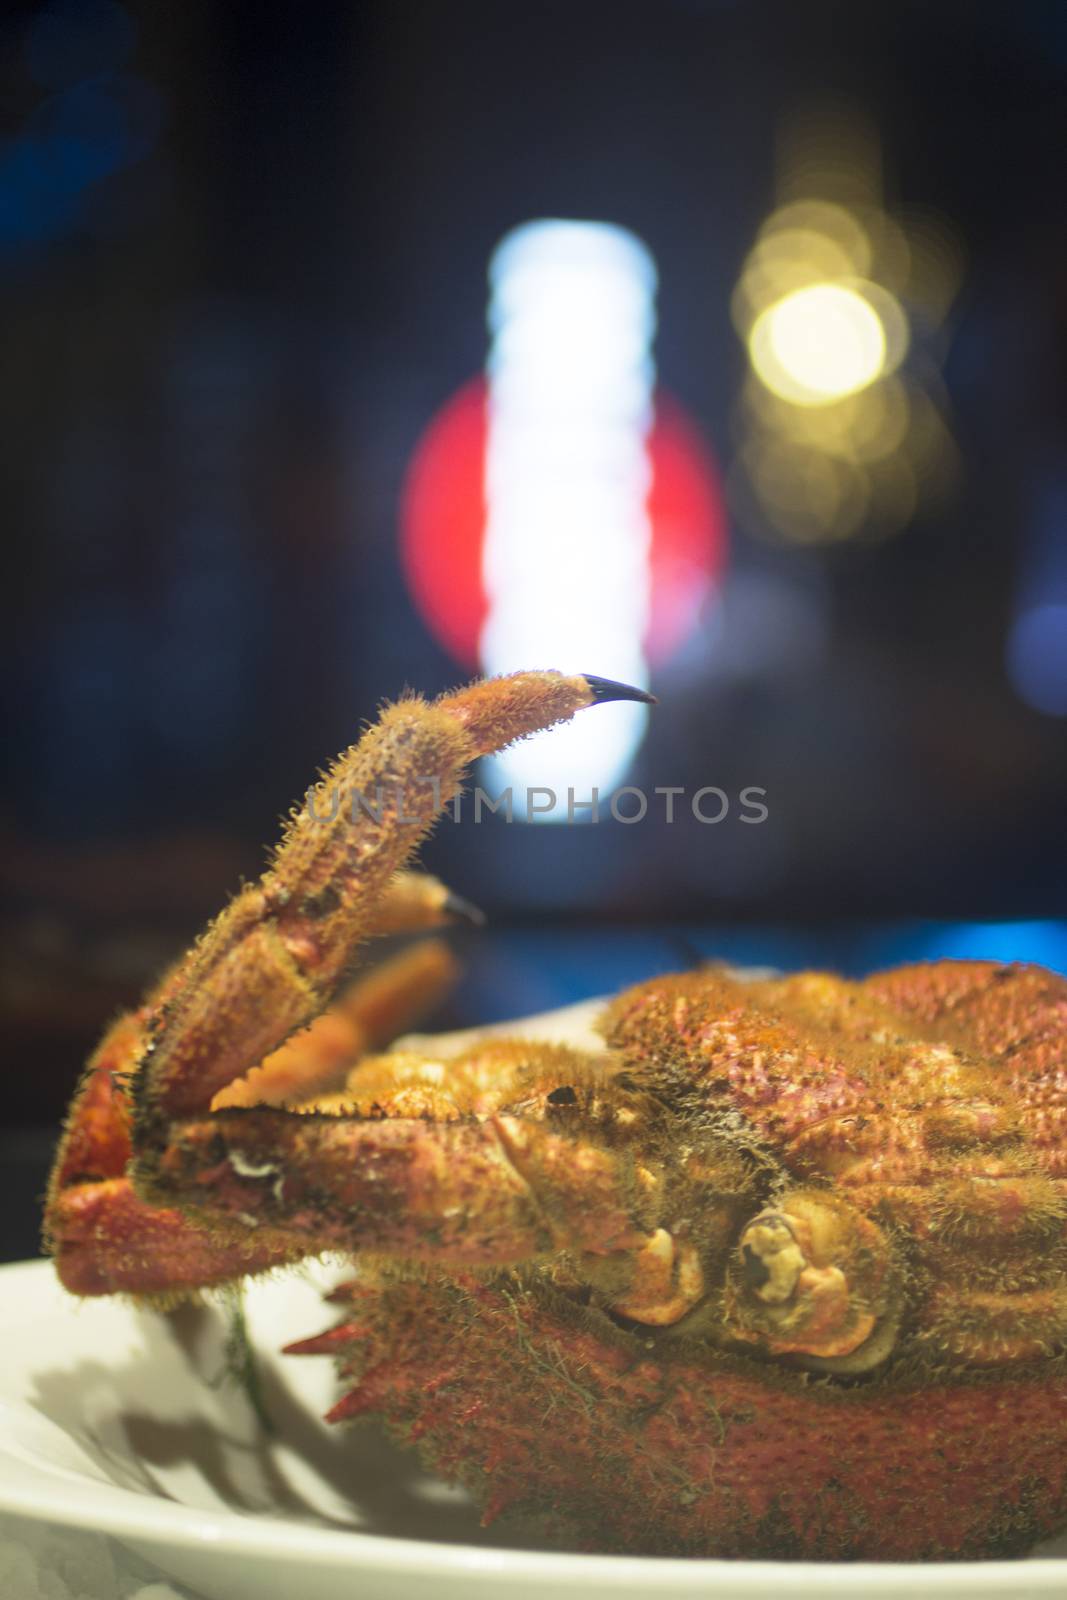 Crab on ice in restaurant by edwardolive